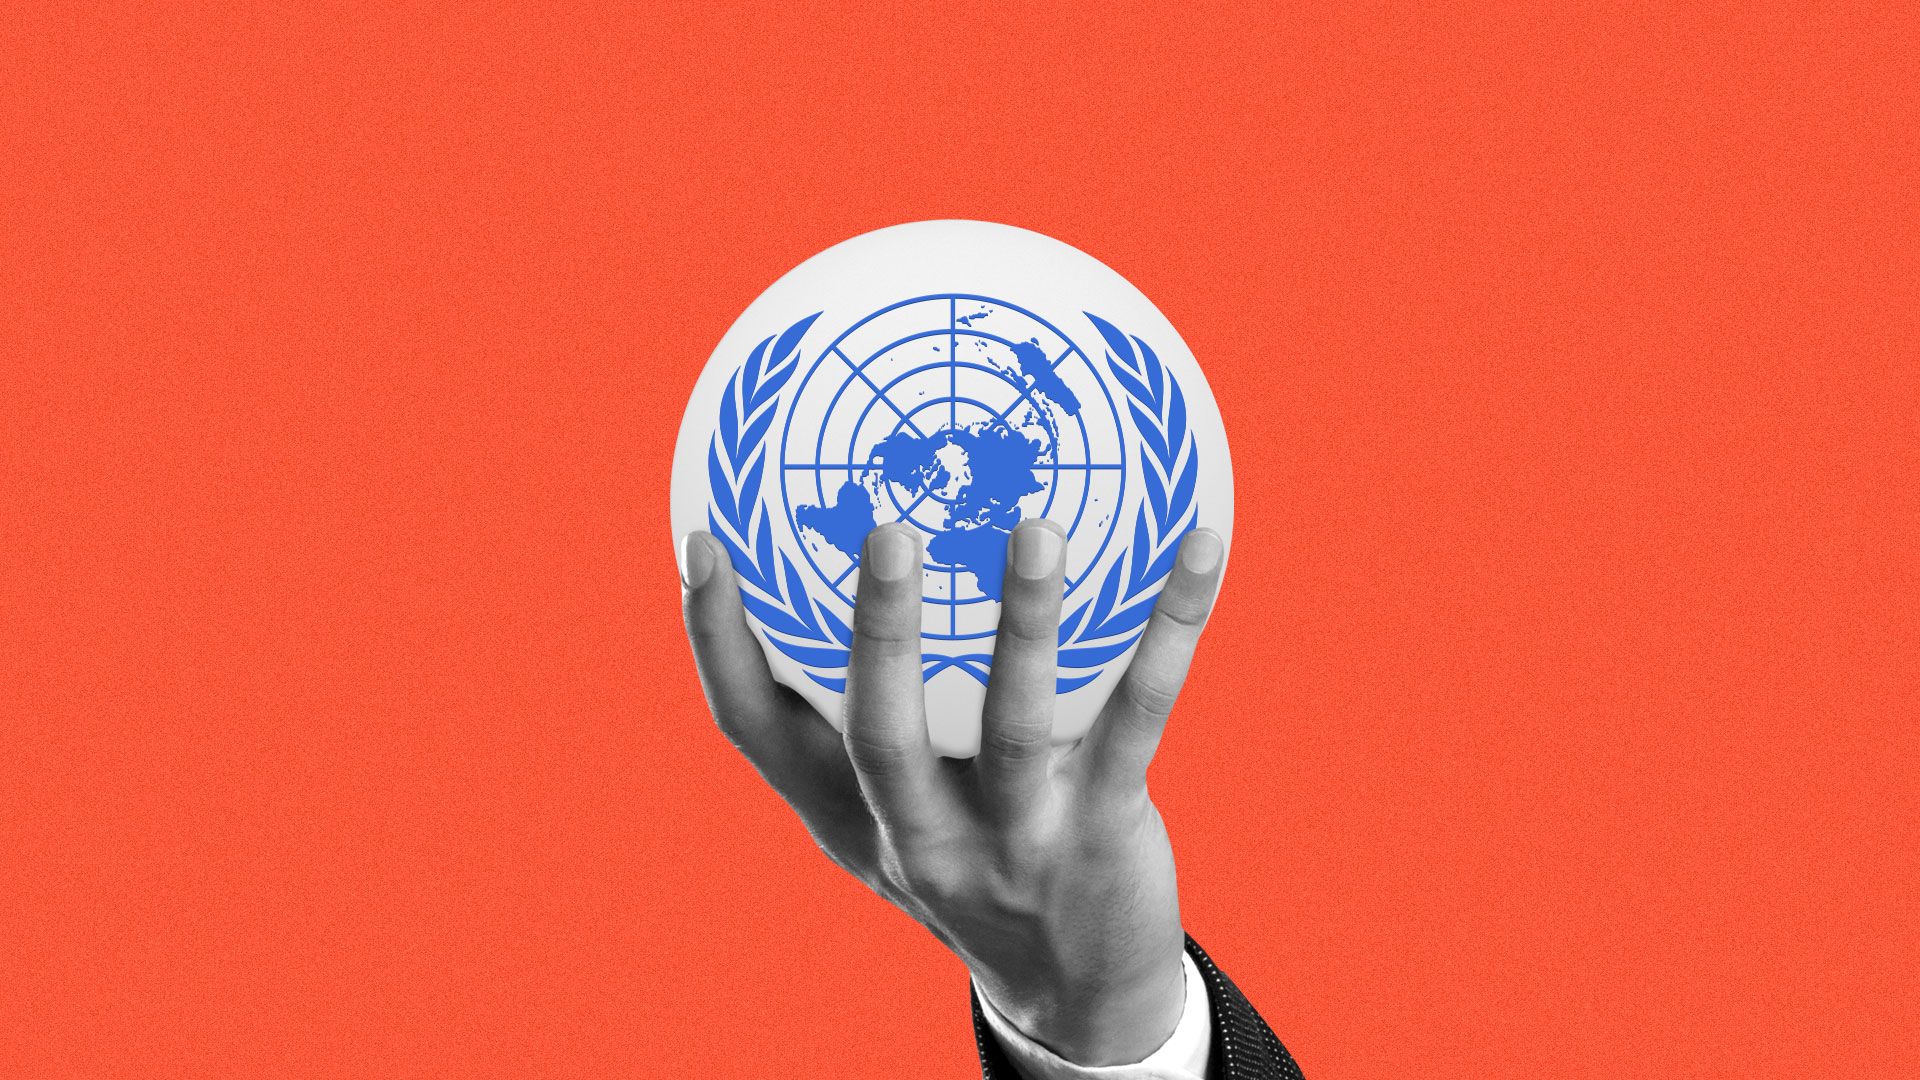 Illustration of suited arm holding a sphere with the U.N. logo.